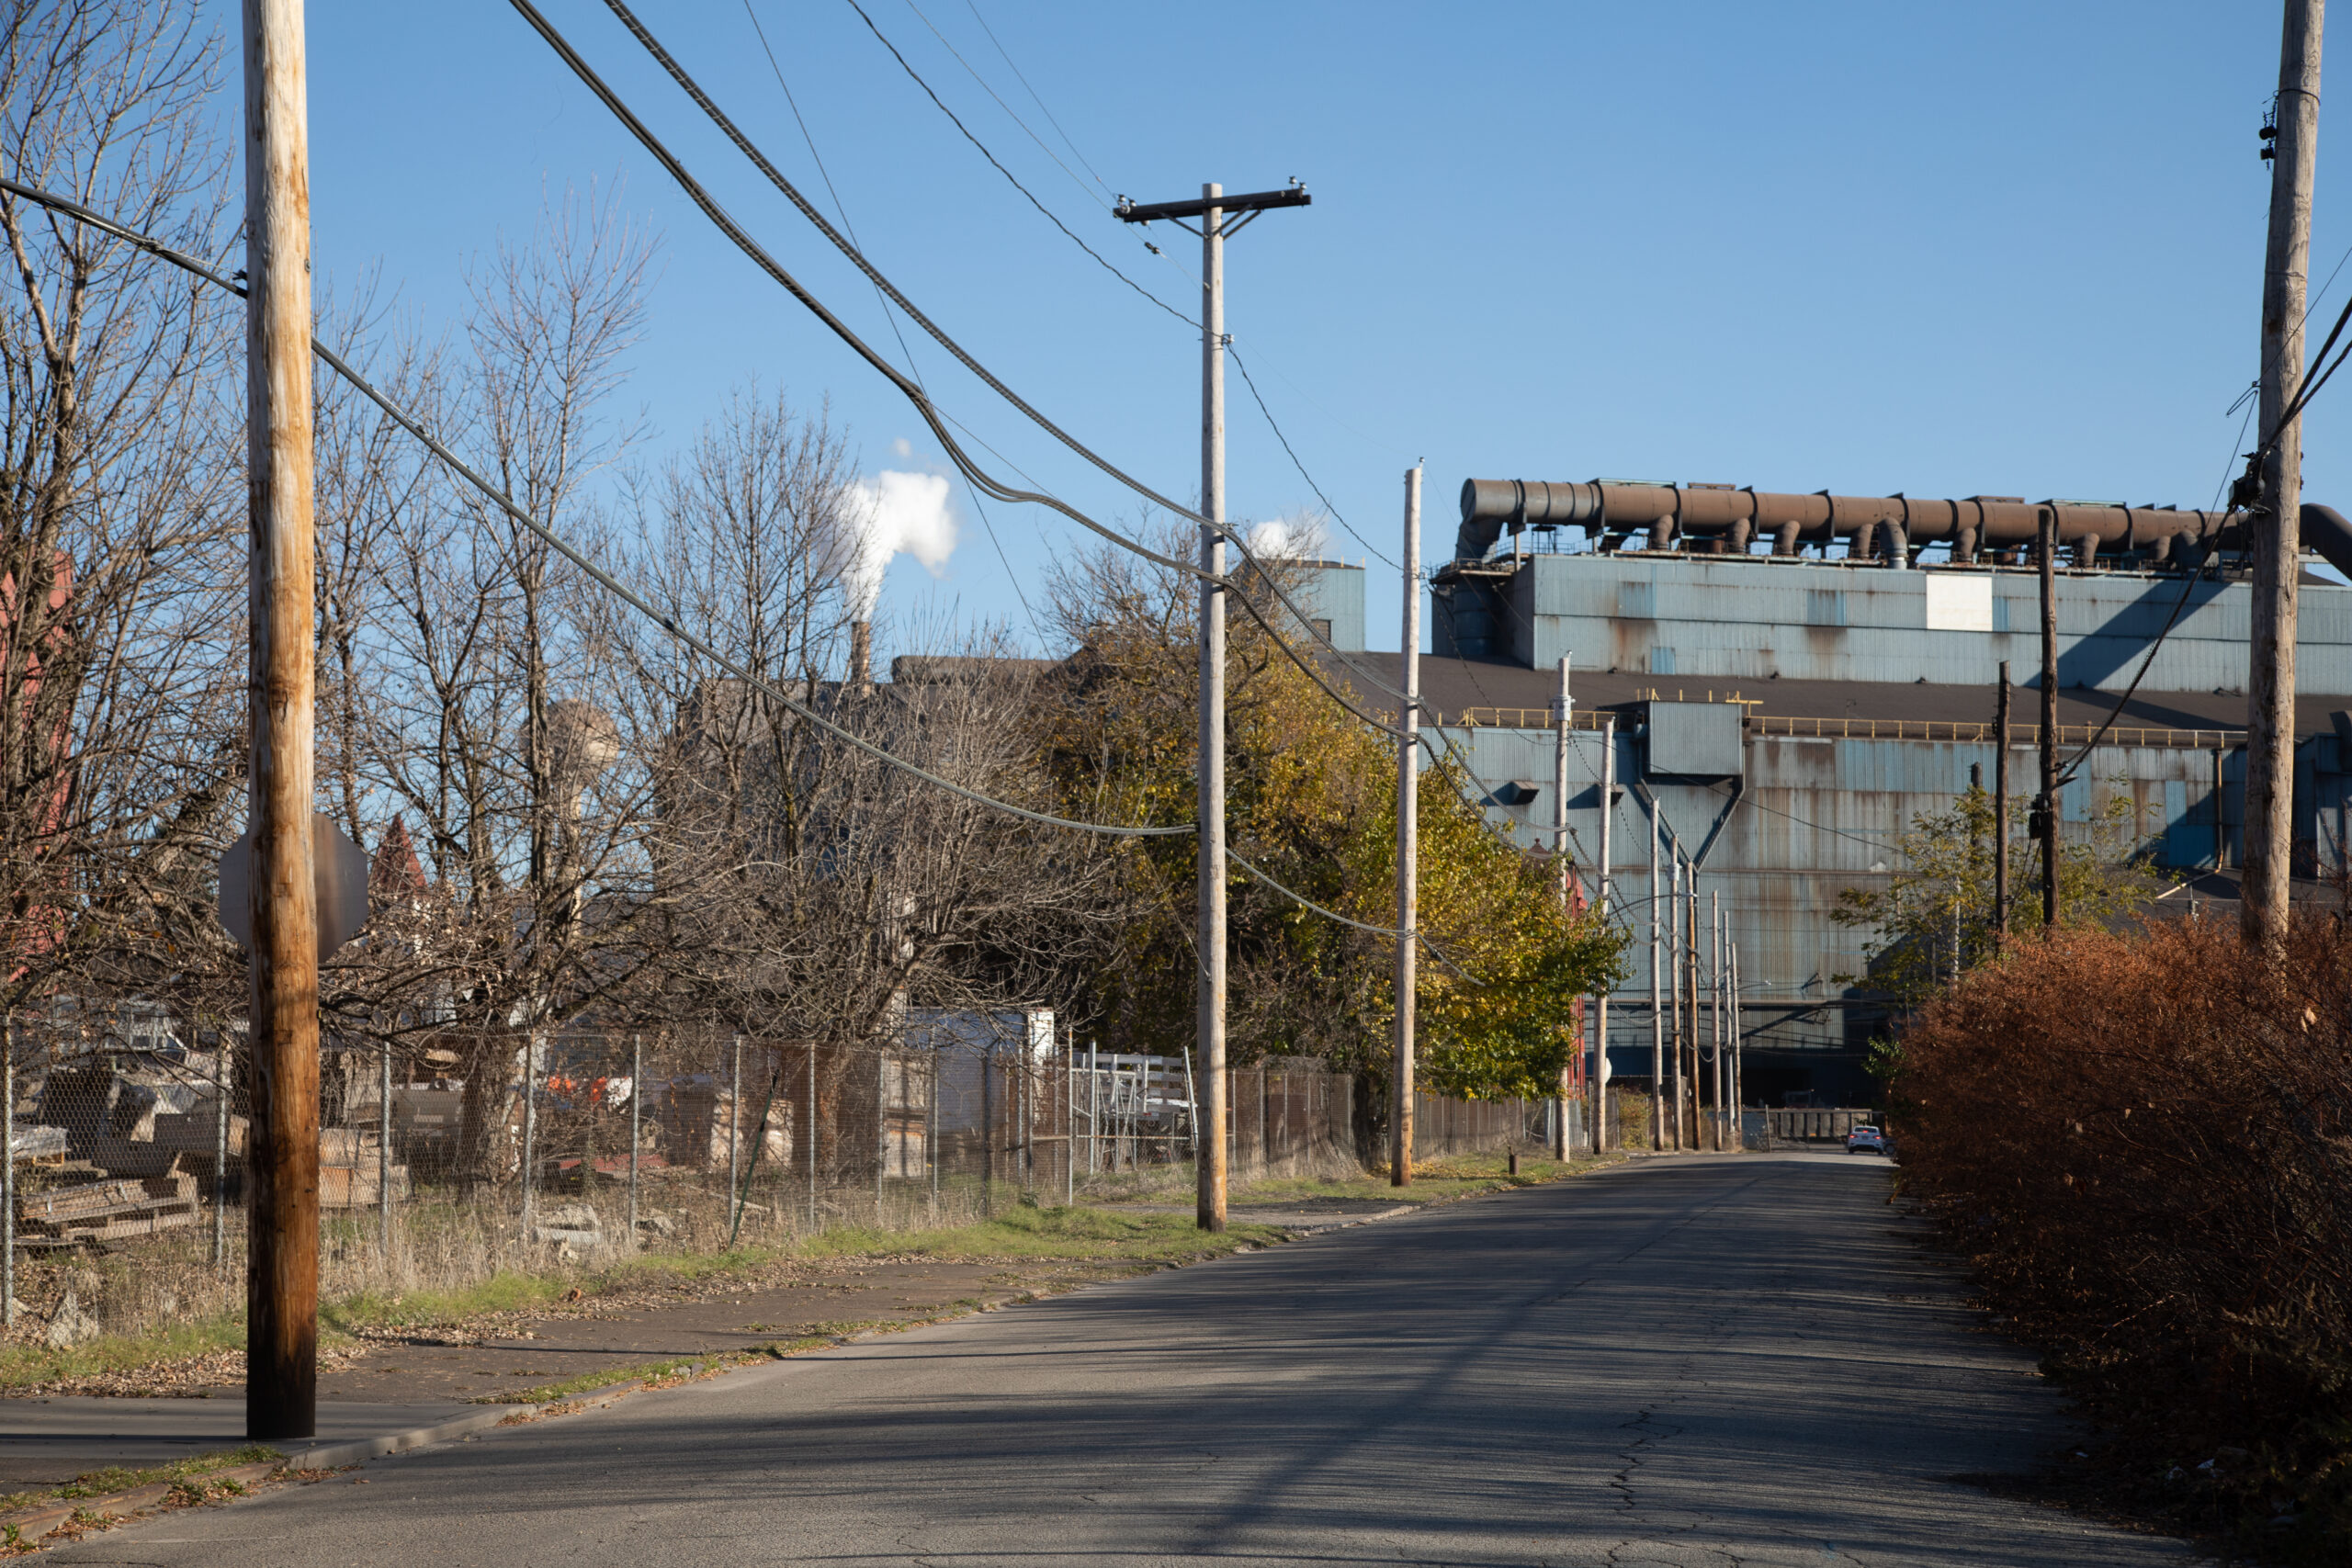 10 - US Steel Corp - by Heather Schor Photography